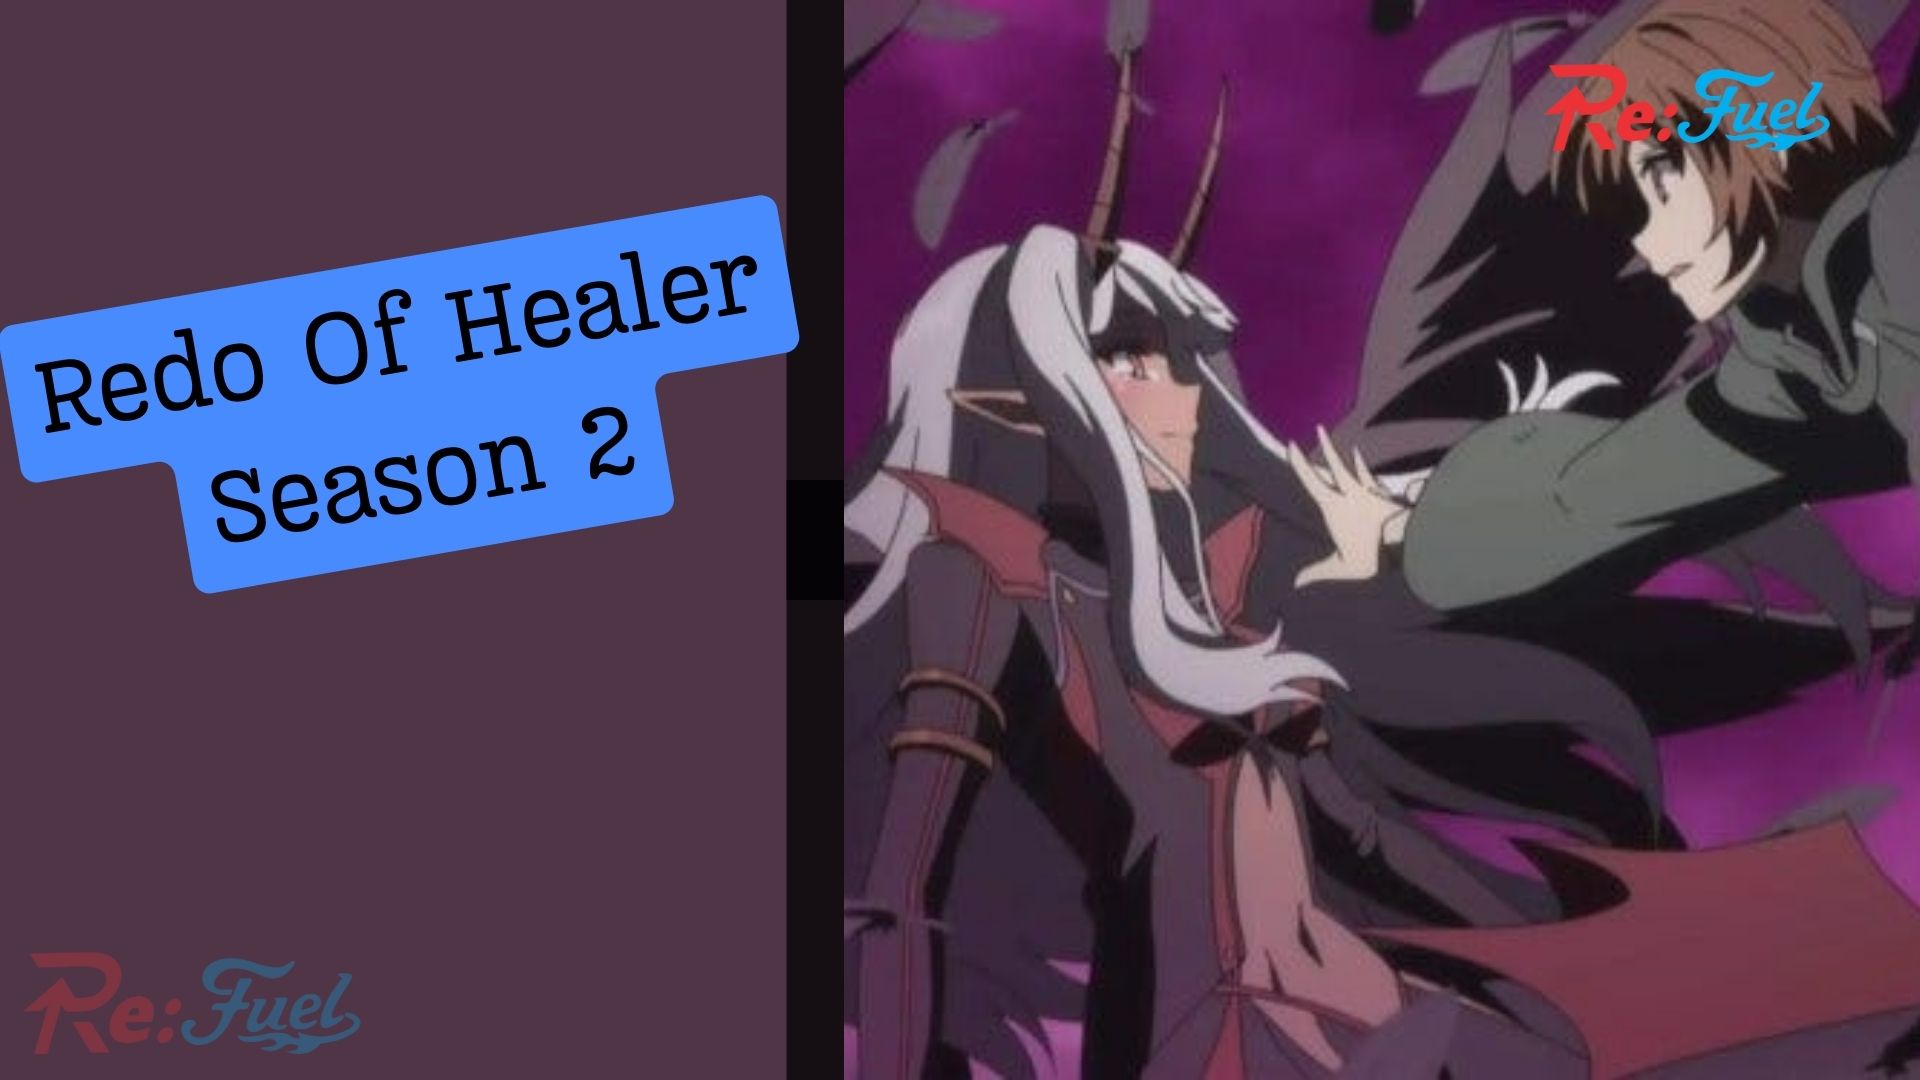 All You Need To Know About Redo Of Healer Season 2